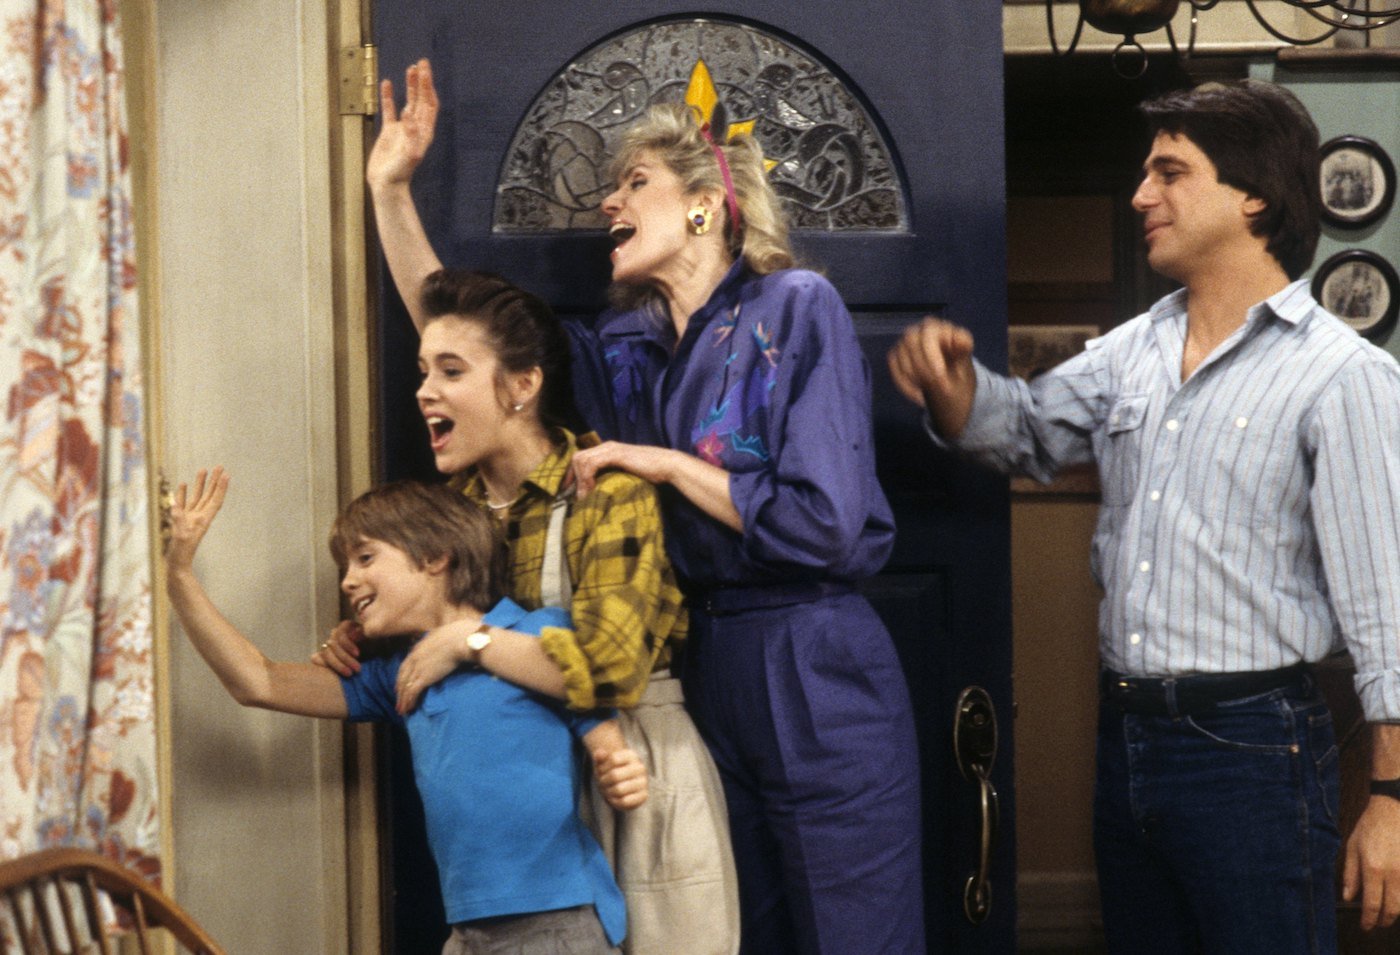 Danny Pintauro, Alyssa Milano, Judith Light, and Tony Danza from 'Who's the Boss?' stand by the door and Danny waves